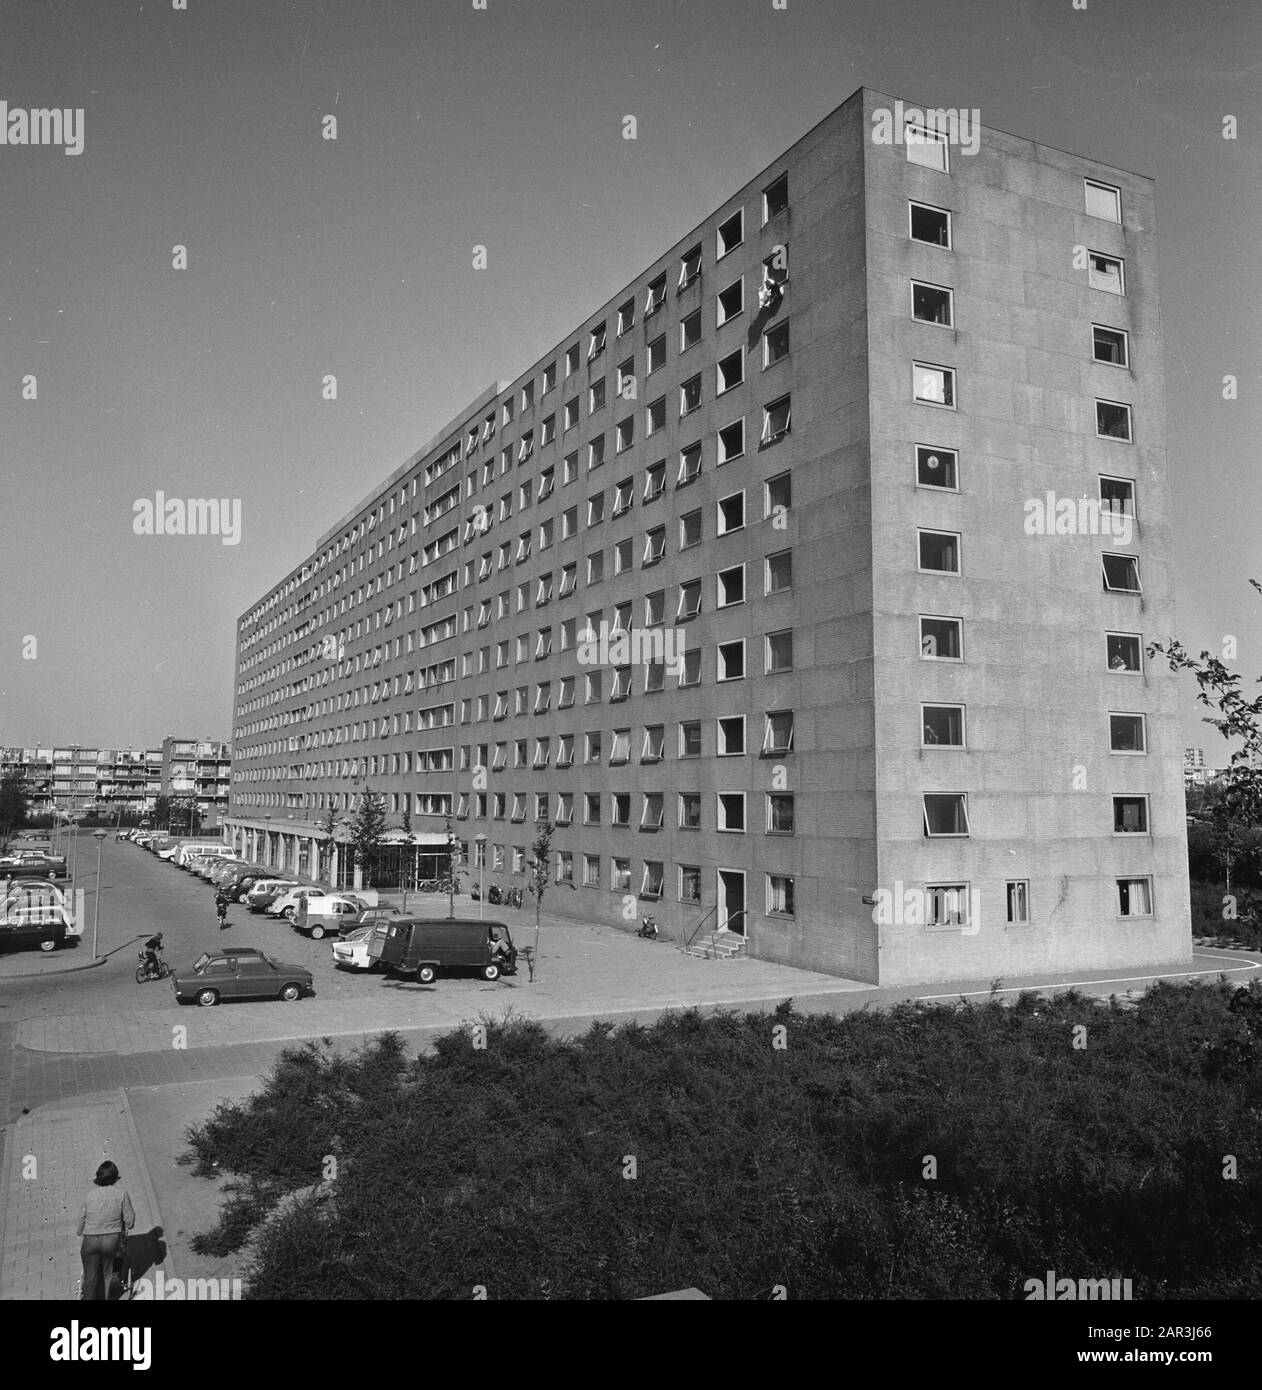 Exterior of student flat Zilverberg Date: September 14, 1973 Location: Amsterdam Keywords: architecture, student housing, housing Institution name: Volkskrant Stock Photo